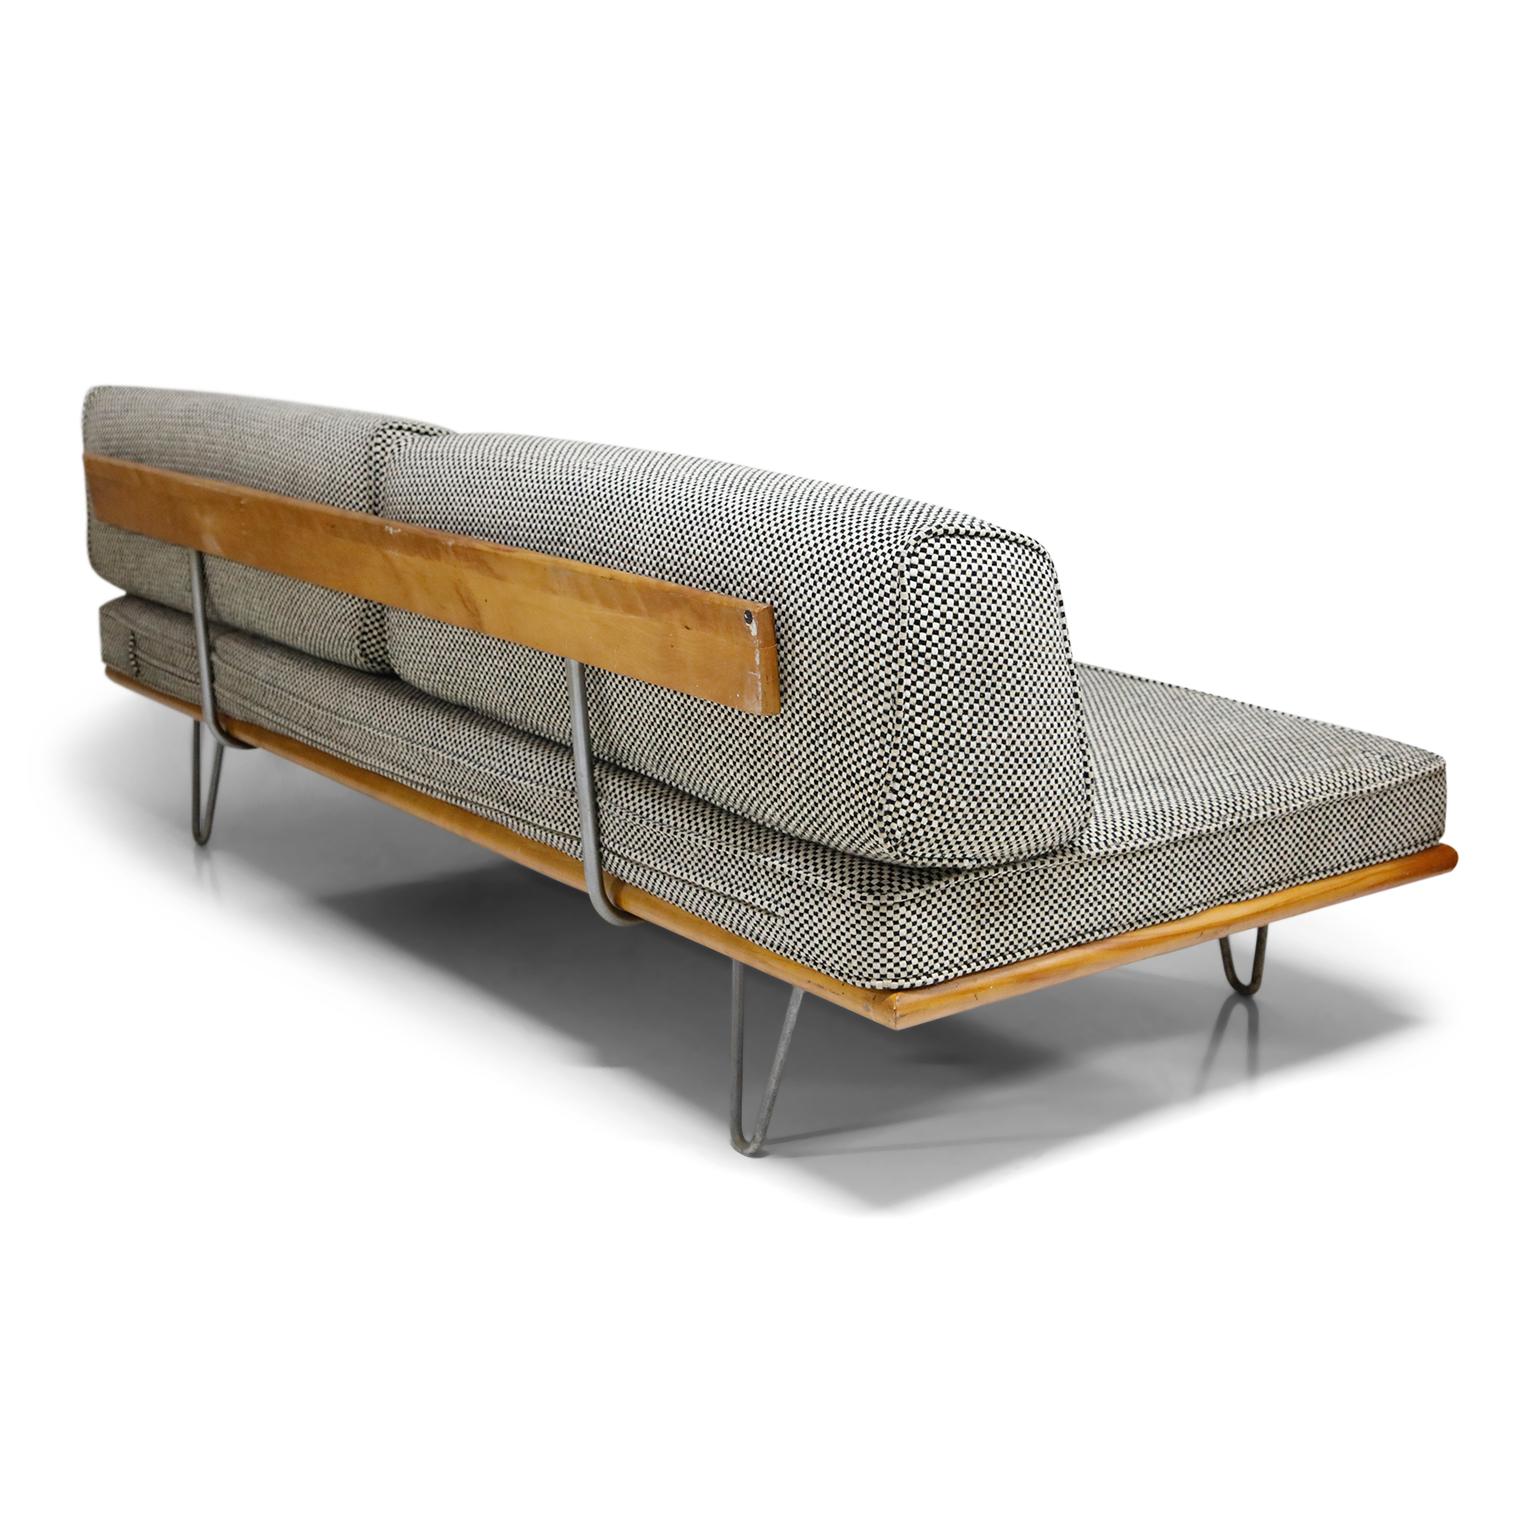 This incredible highly collectible Mid-Century Modern convertible daybed sofa was designed by George Nelson and manufactured by Herman Miller, circa 1950s. Ingenious design allows this to be used as a sofa and then when needed, removing the back